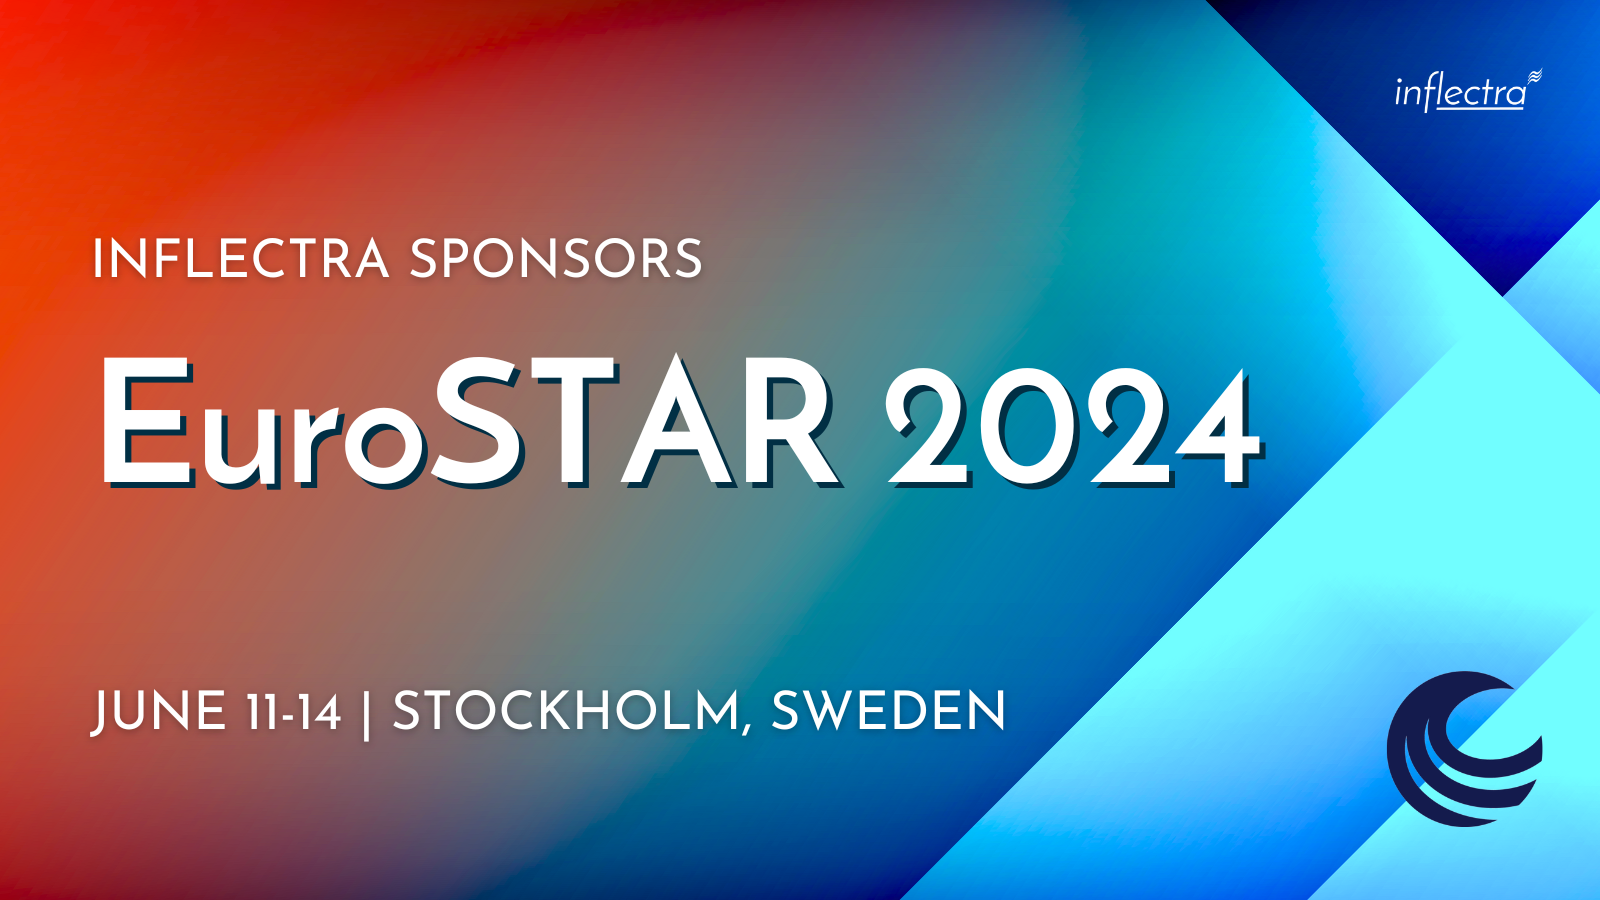 Image of a banner advertising EuroSTAR 2024, a software testing conference taking place June 11-14 in Stockholm, Sweden. The banner also shows the sponsor Inflectra.